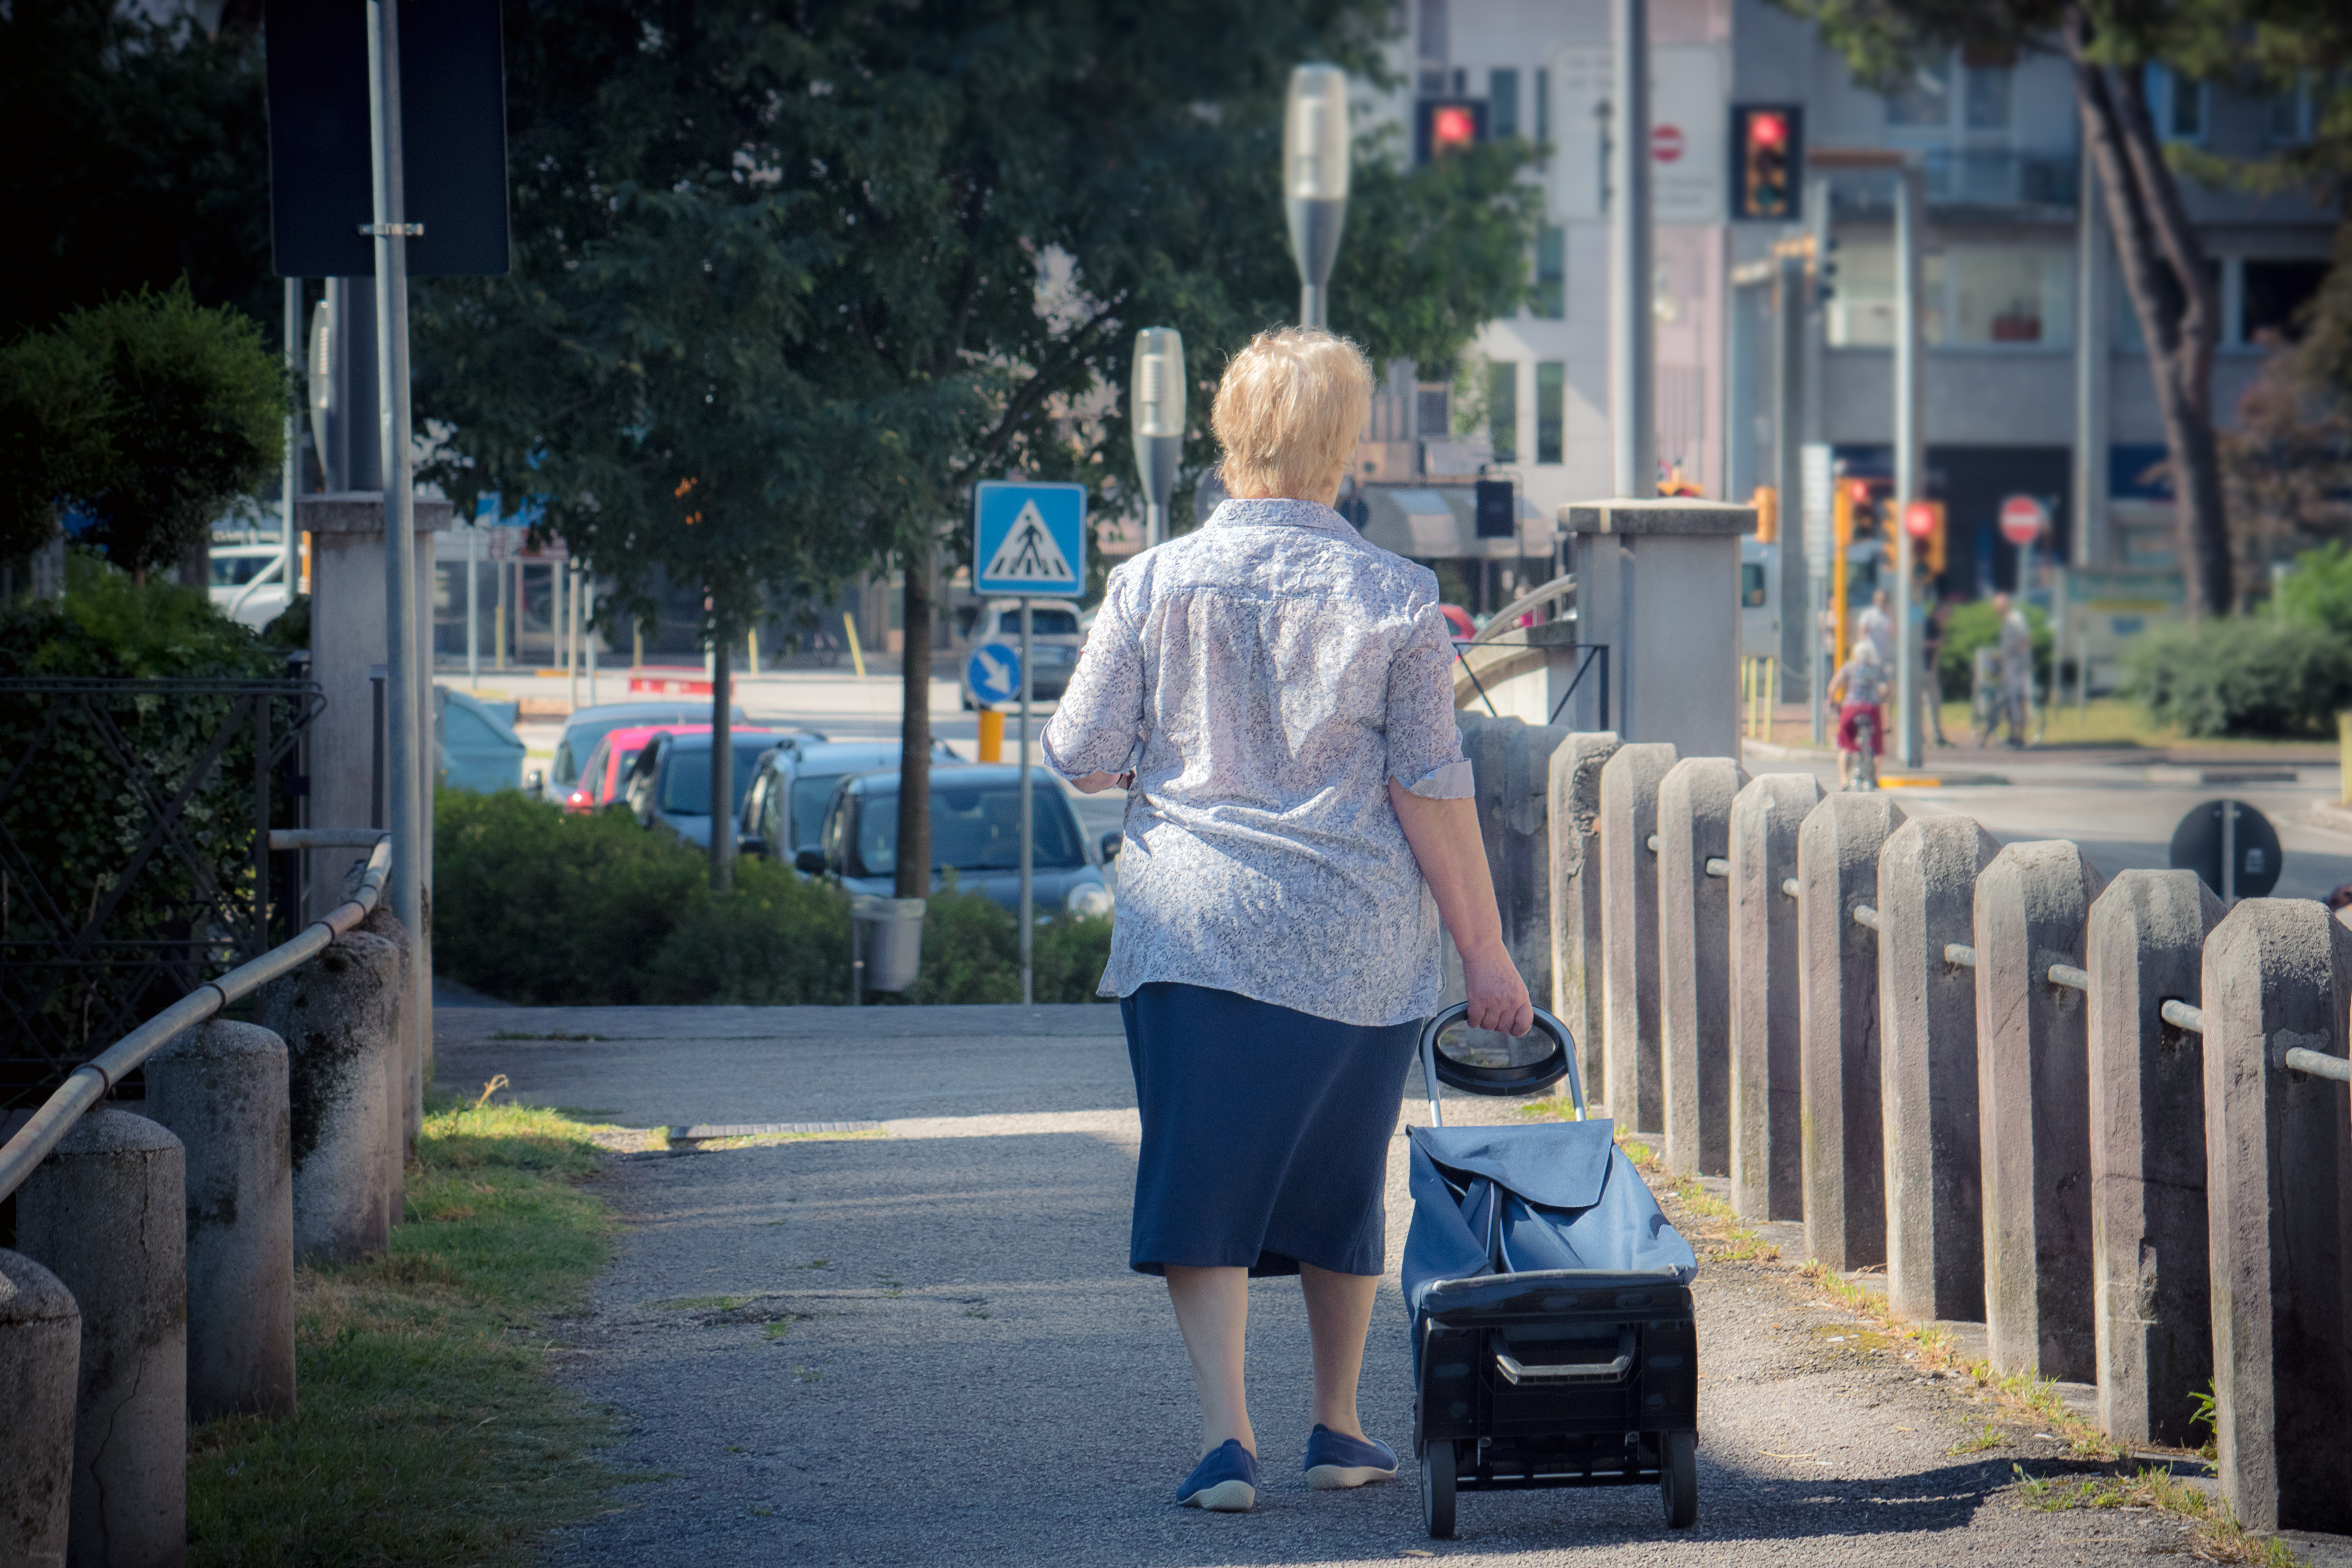 A woman walking with a trolley bag | Source: Shutterstock